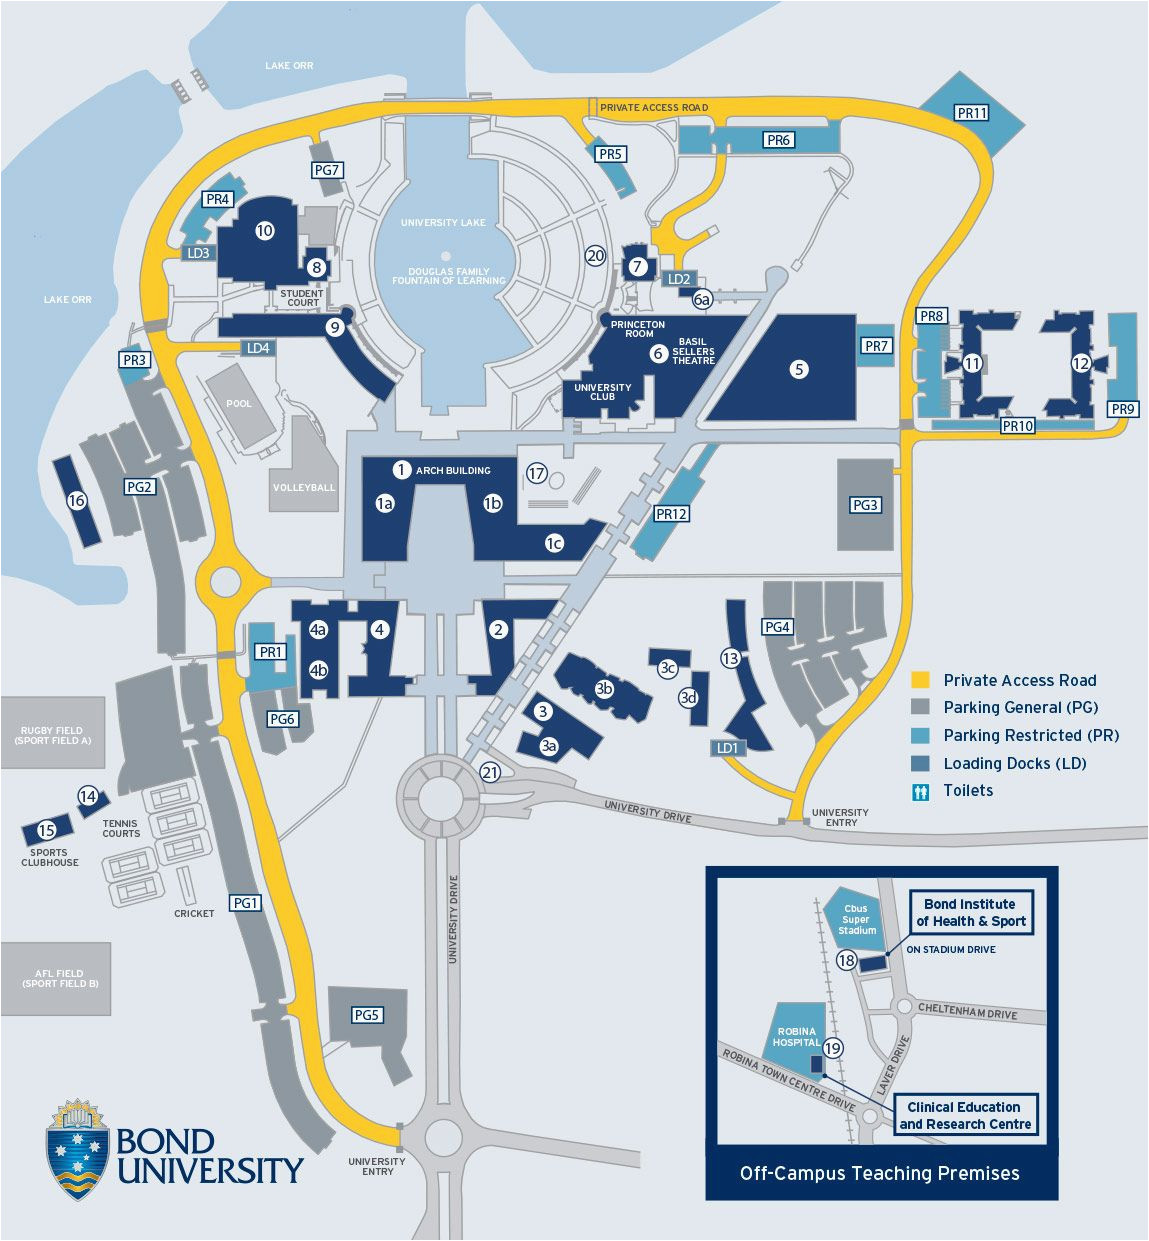 New England College Campus Map Campus Map Campus Maps Campus Map Map Signage Map Layout